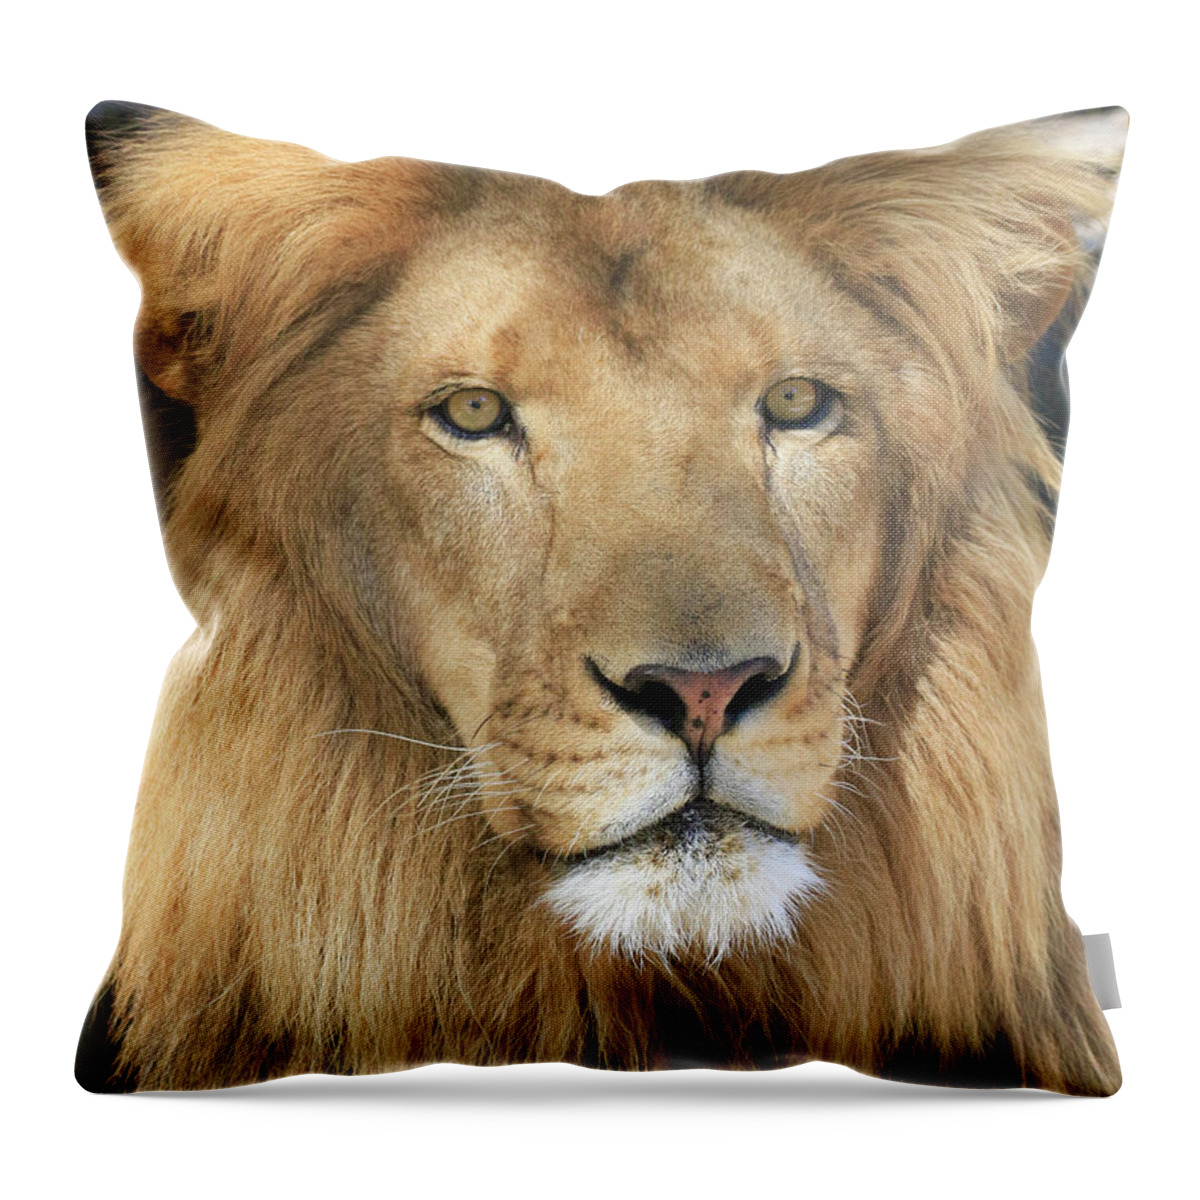 African Lion Throw Pillow featuring the photograph African Lion Male by Steve McKinzie